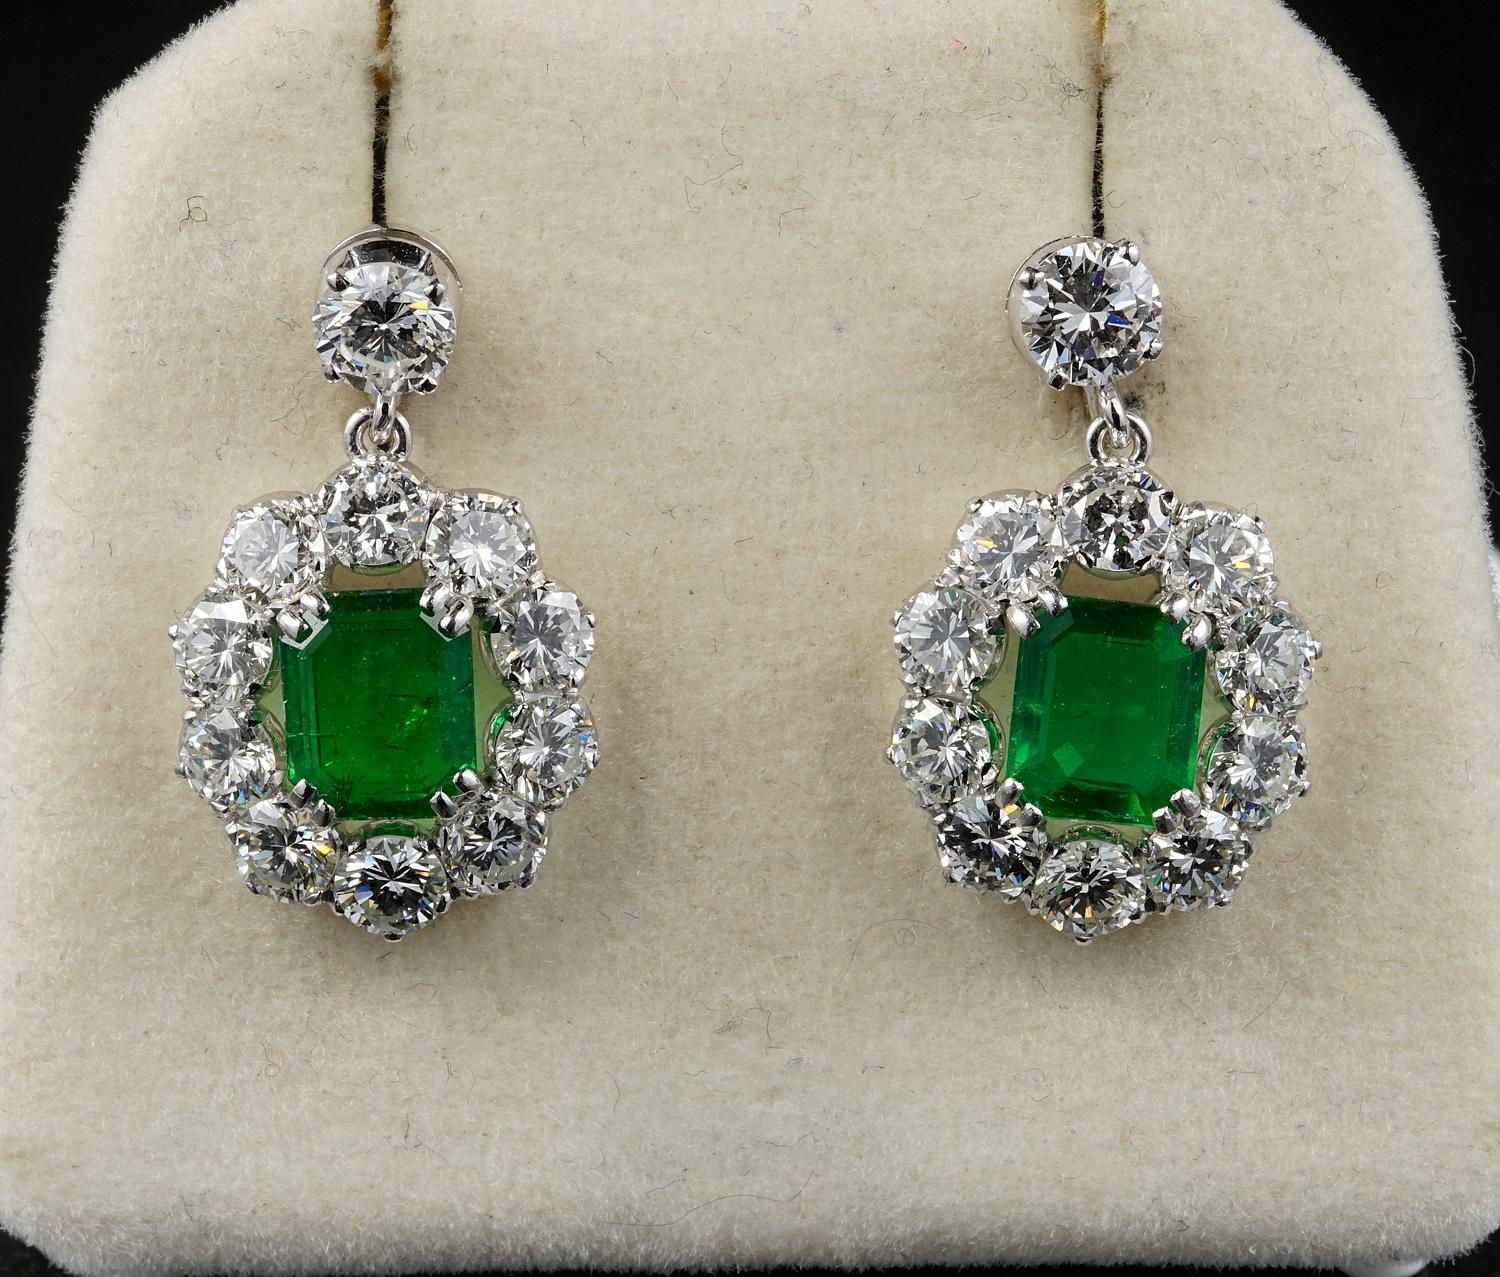 Beautiful classy style of the vintage jewellery, mid century 1960 ca
Hand crafted as individual example of solid Platinum in a traditional drop style
Superb selection of F/G VIF/VVS round brilliant cut Diamonds for 4.50 CT TCW
Emeralds are natural,